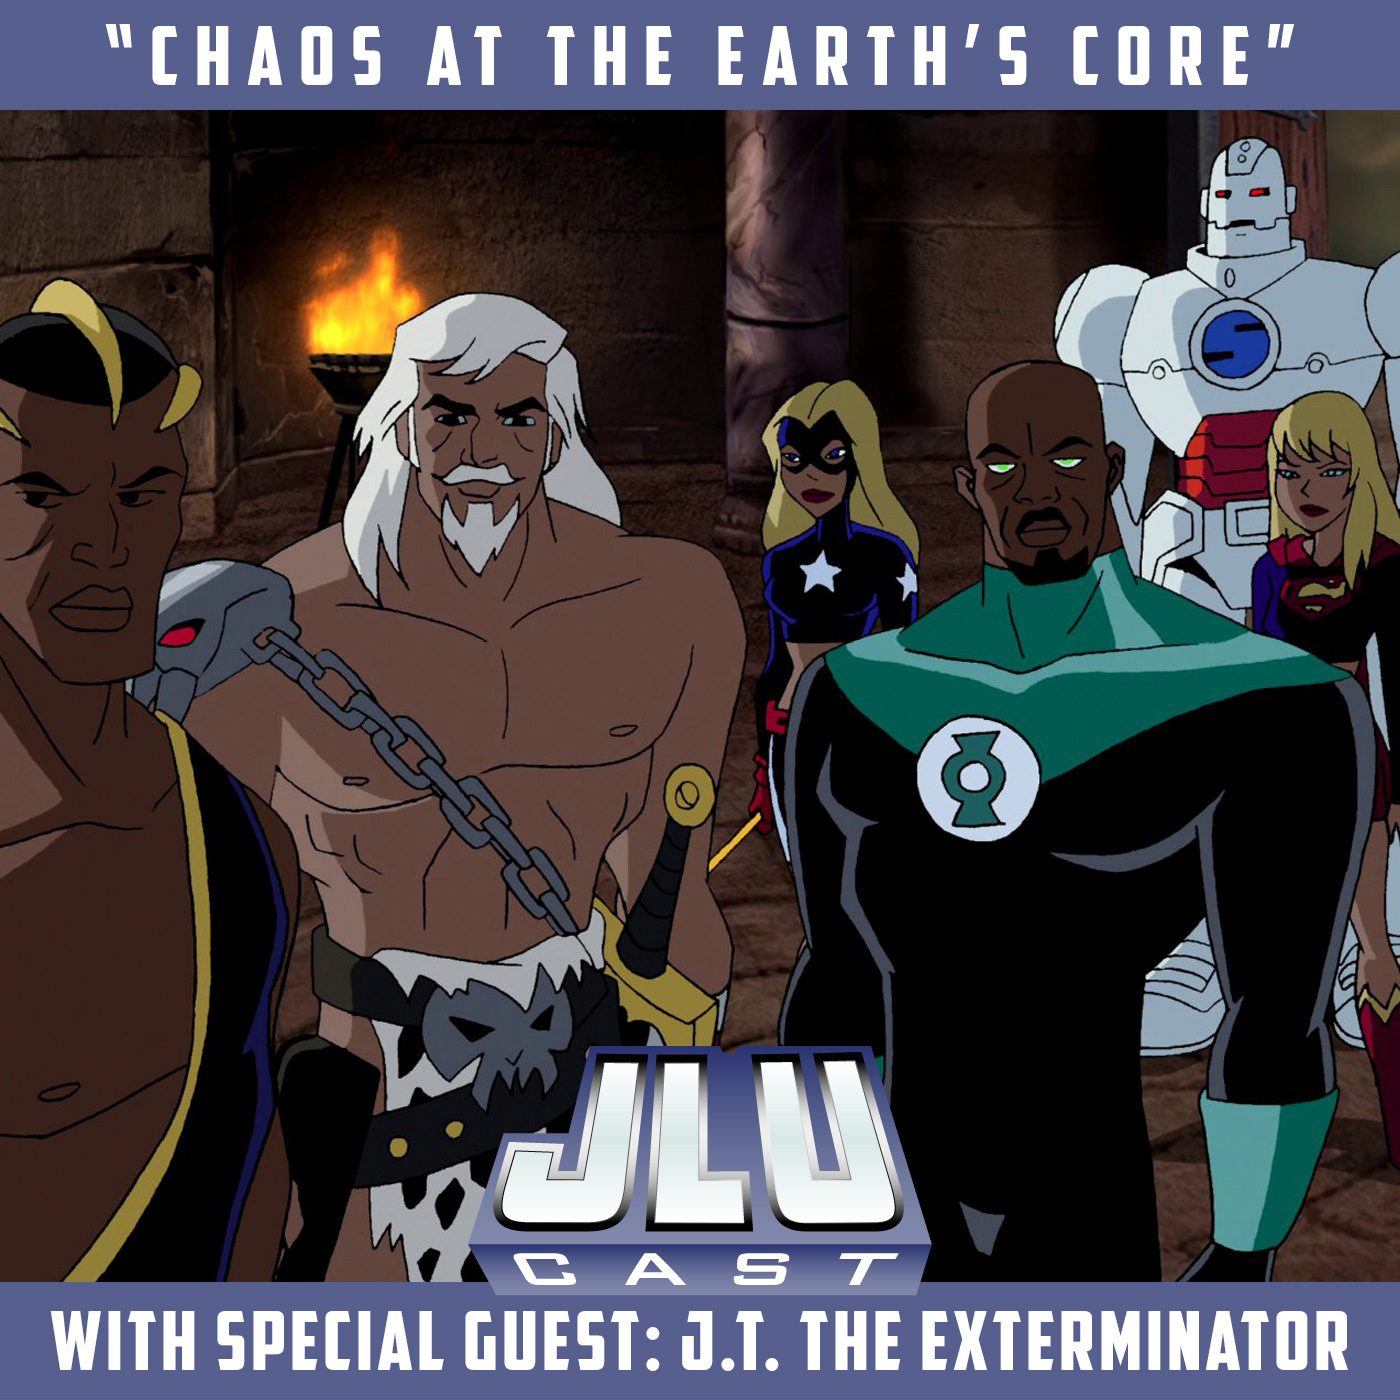 JLUCast Chaos at the Earth’s Core